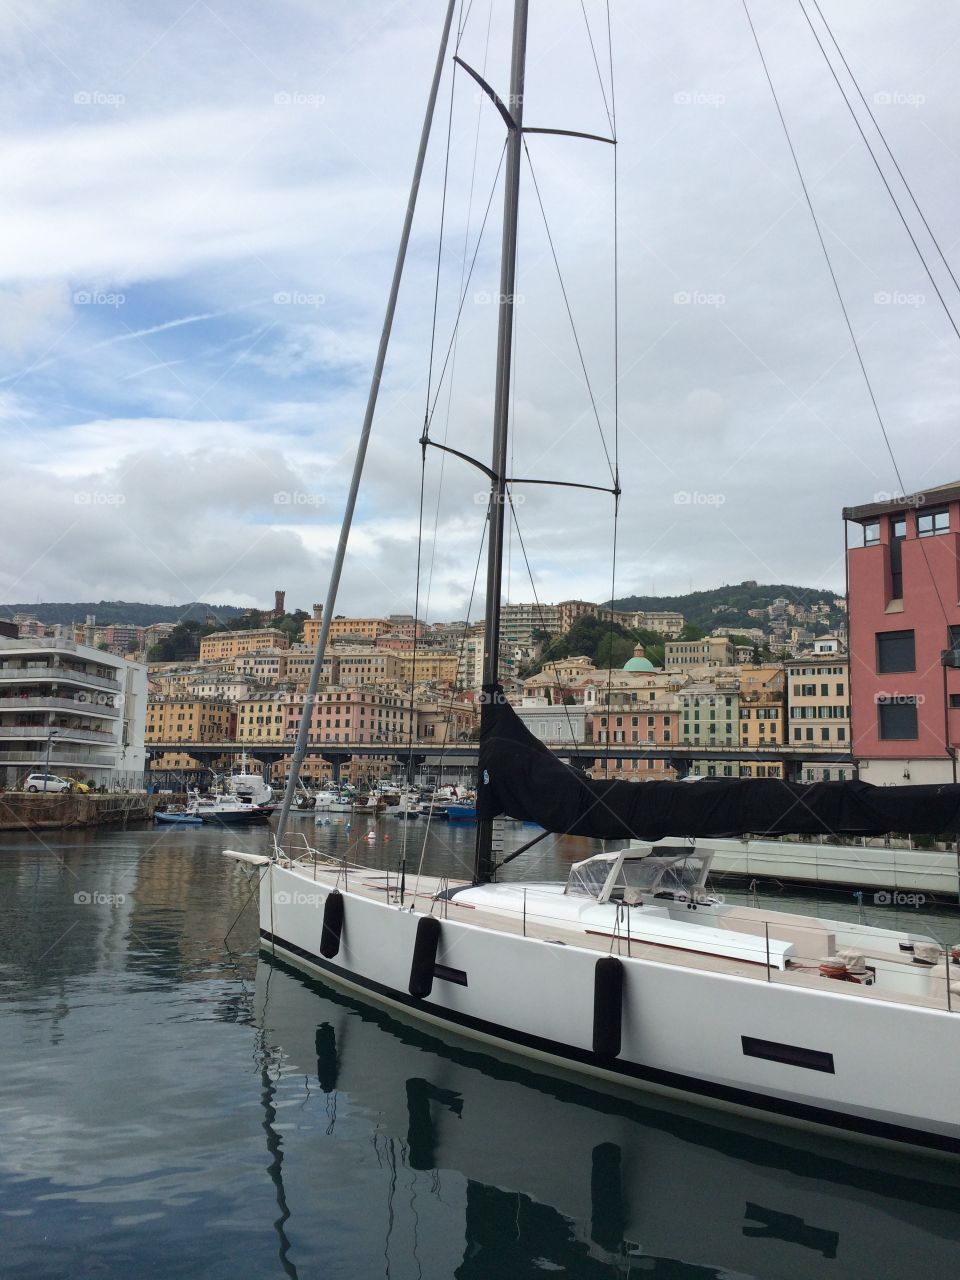 Sailboat in the port. A sailboat ready for an adventure in Genoa, Italy